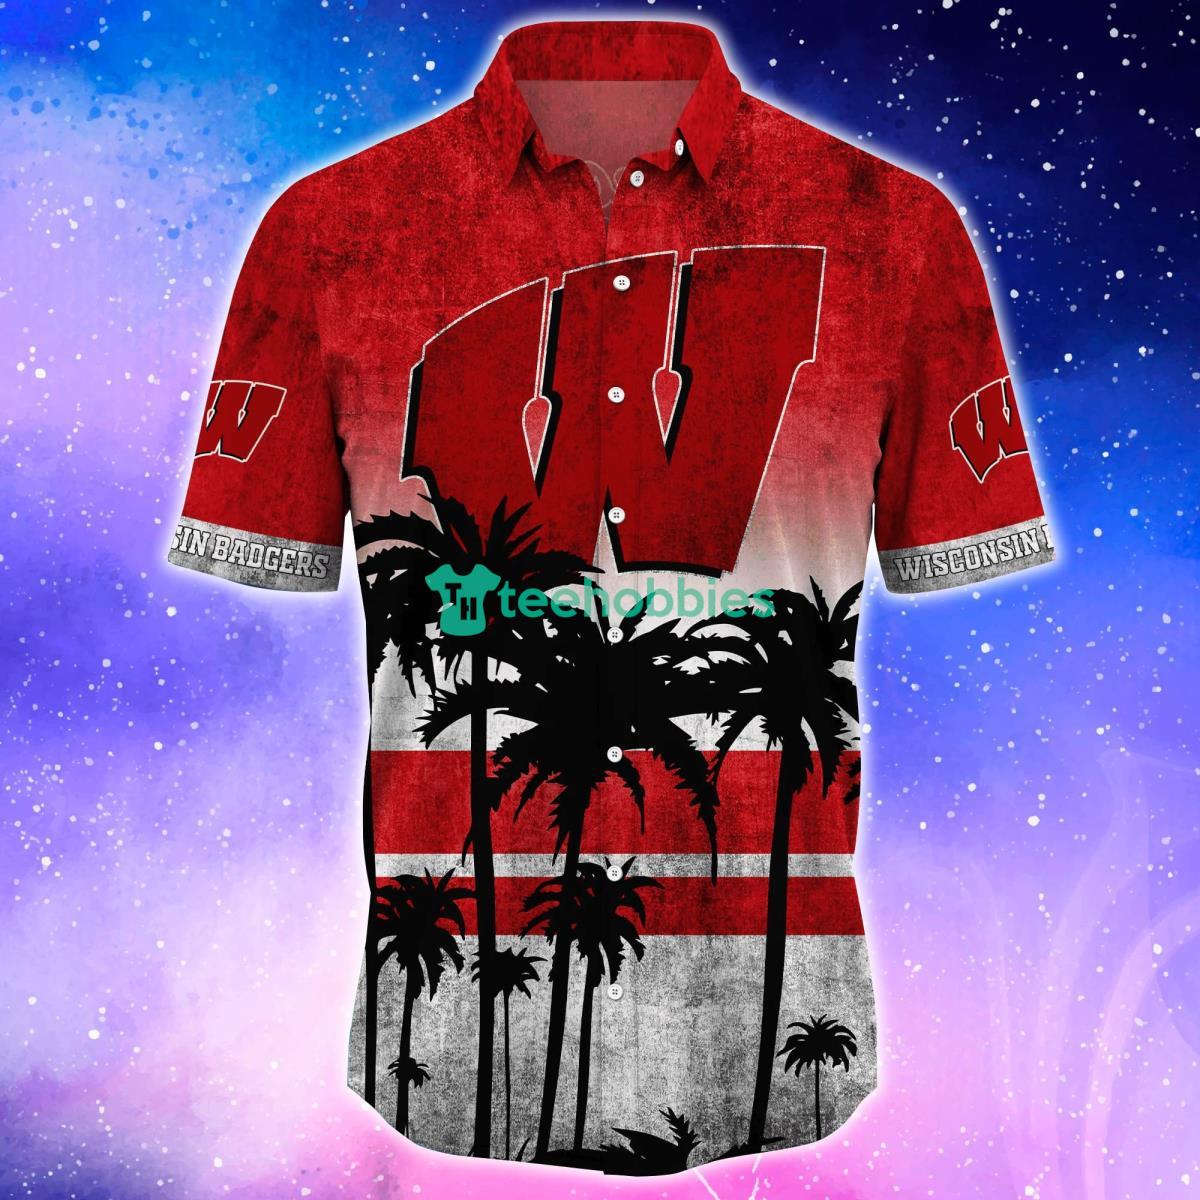 Wisconsin Badgers Trending Hawaiian Shirt And Shorts For Fans Product Photo 2